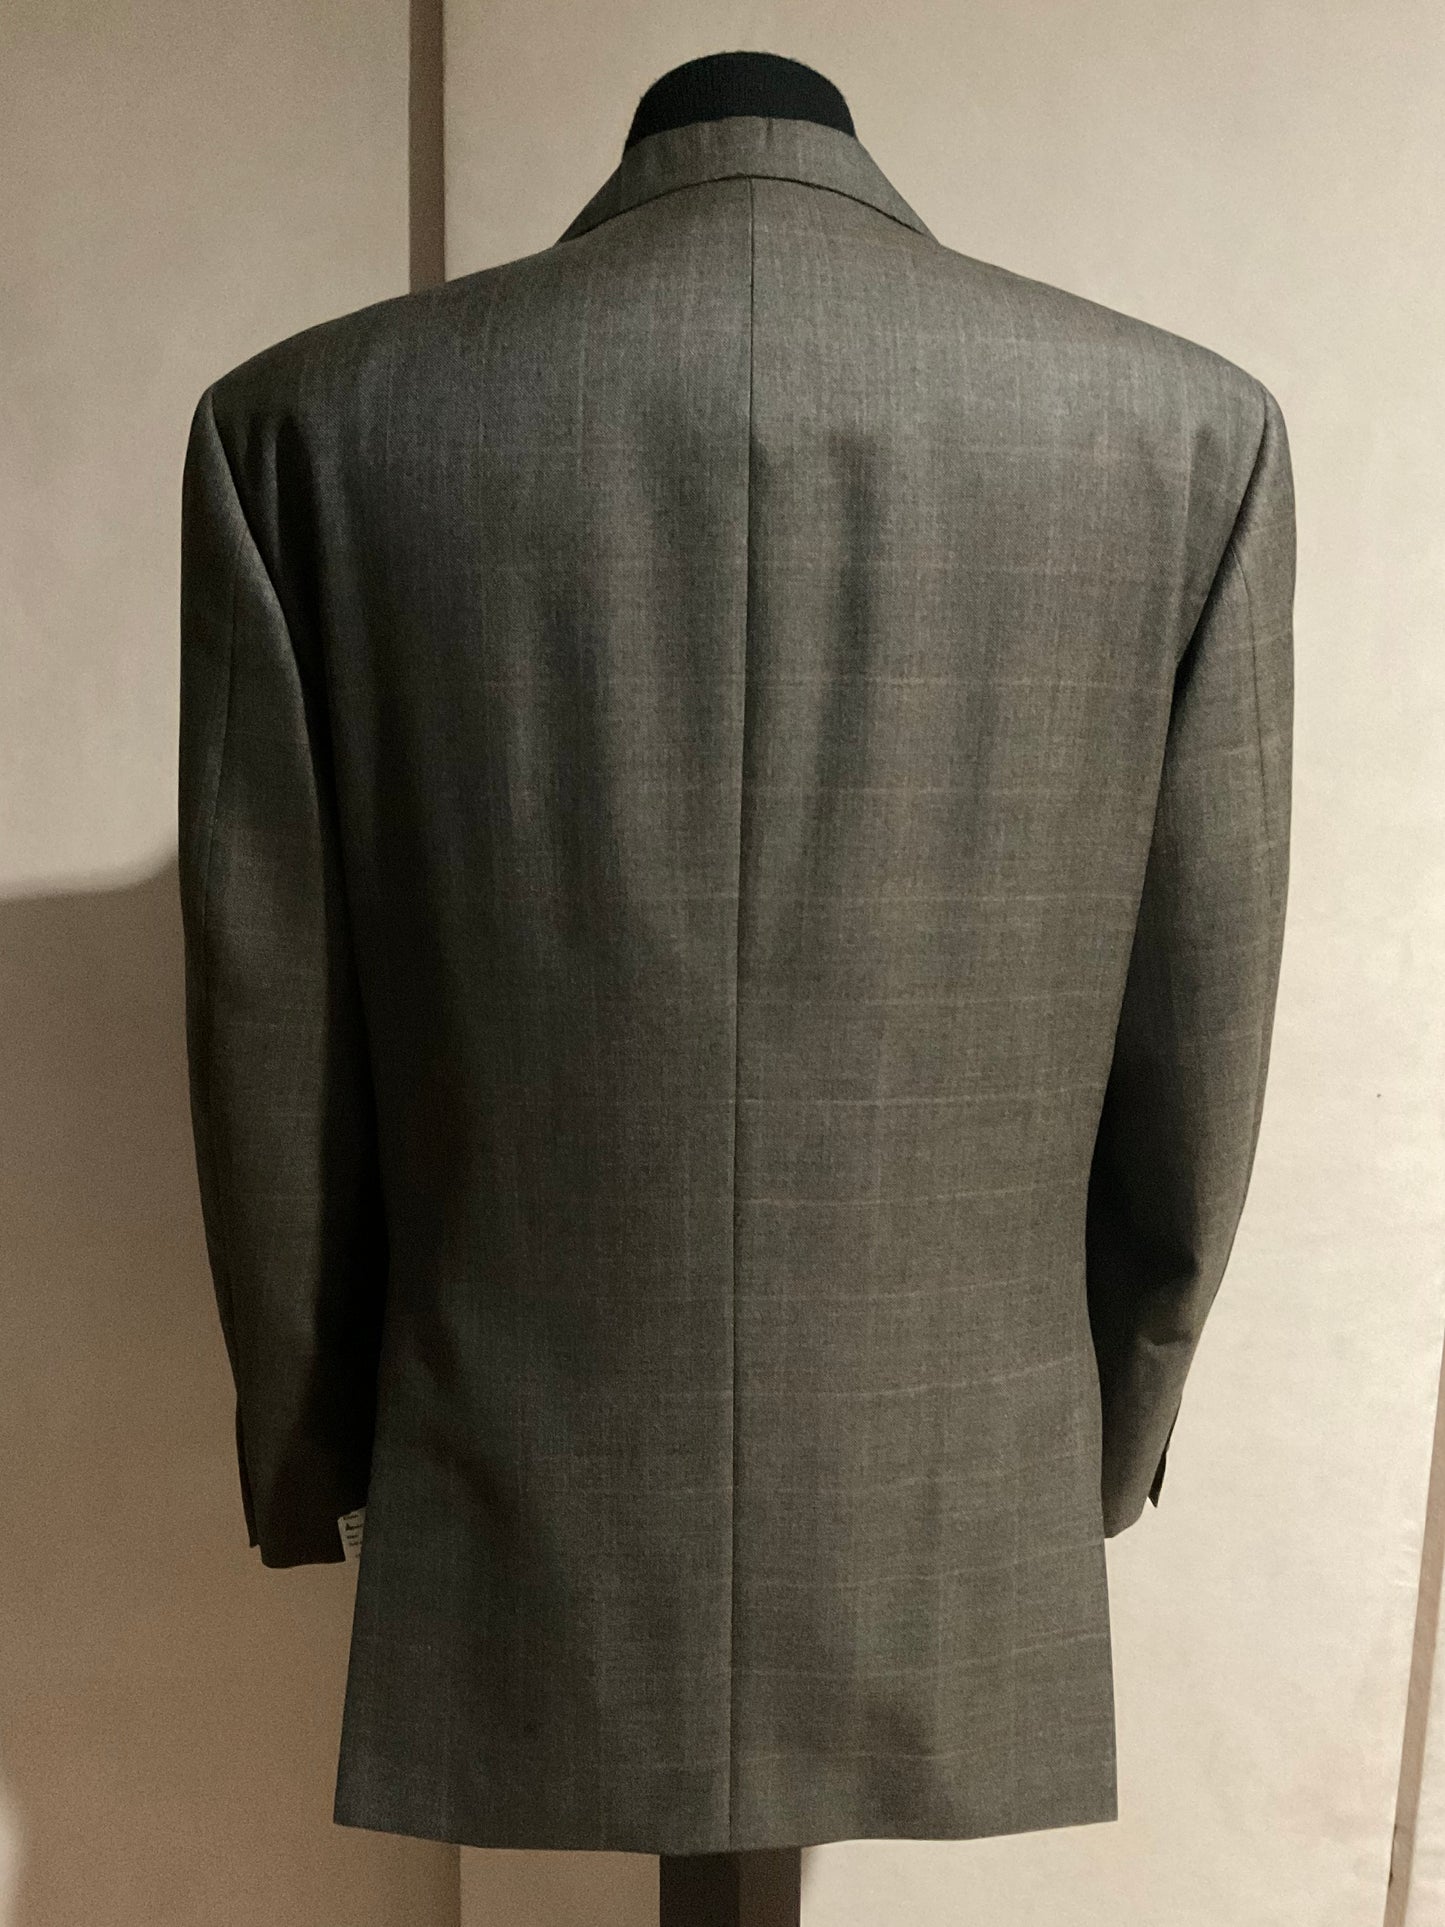 R P SUIT / OLIVE WINDOW PANE / 3 PIECE VESTED / 42 REG - LONG / NEW / MADE IN CANADA